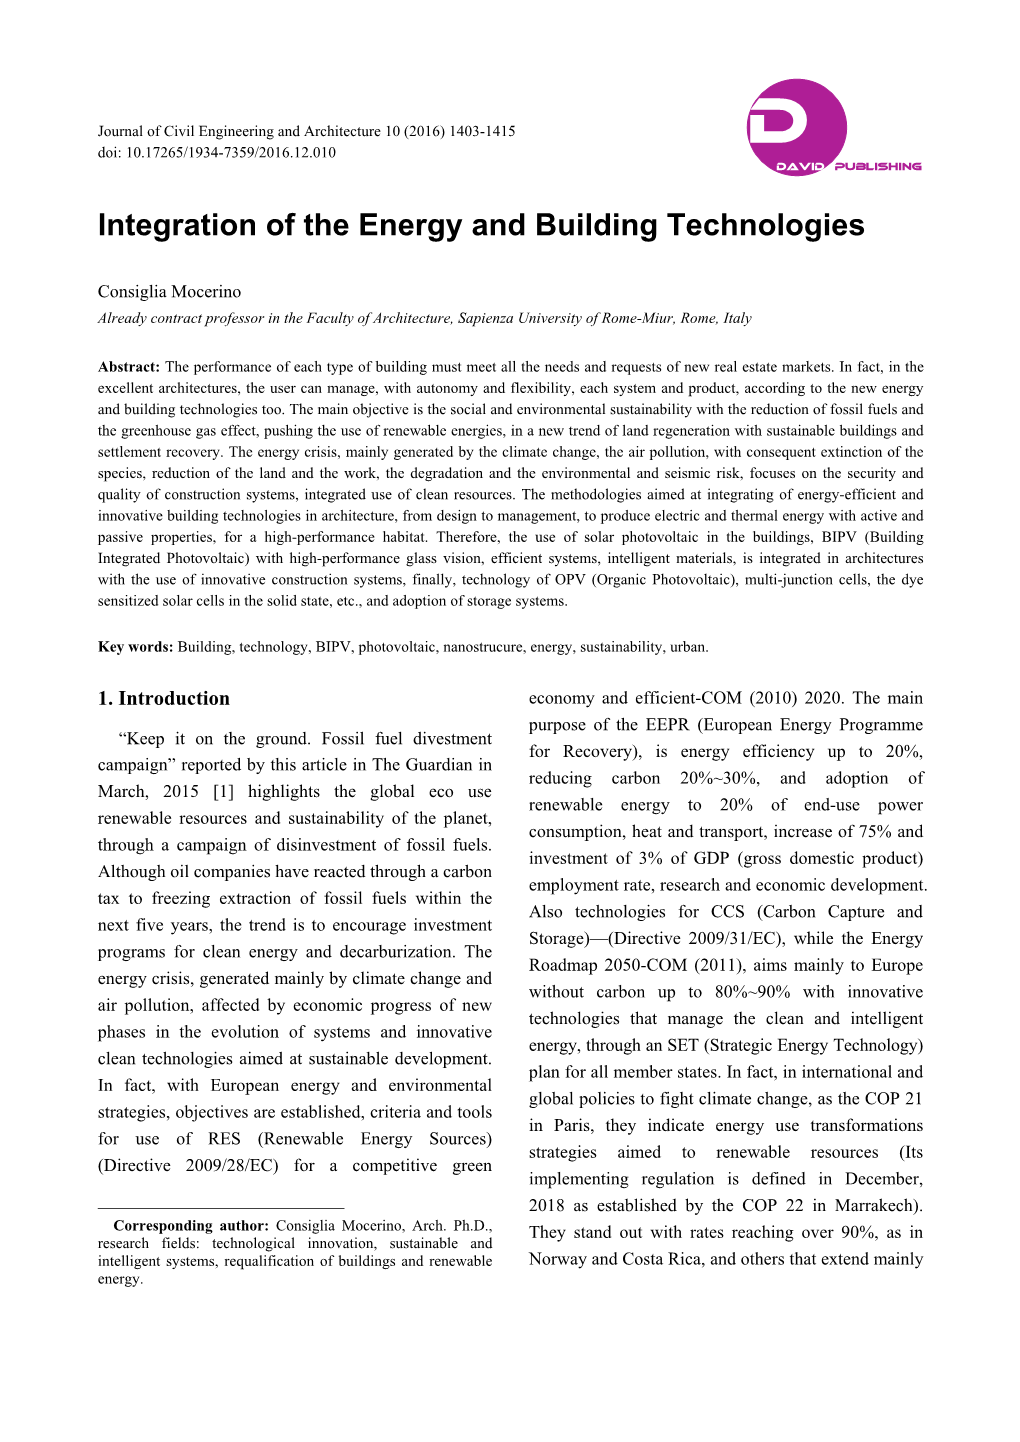 Integration of the Energy and Building Technologies